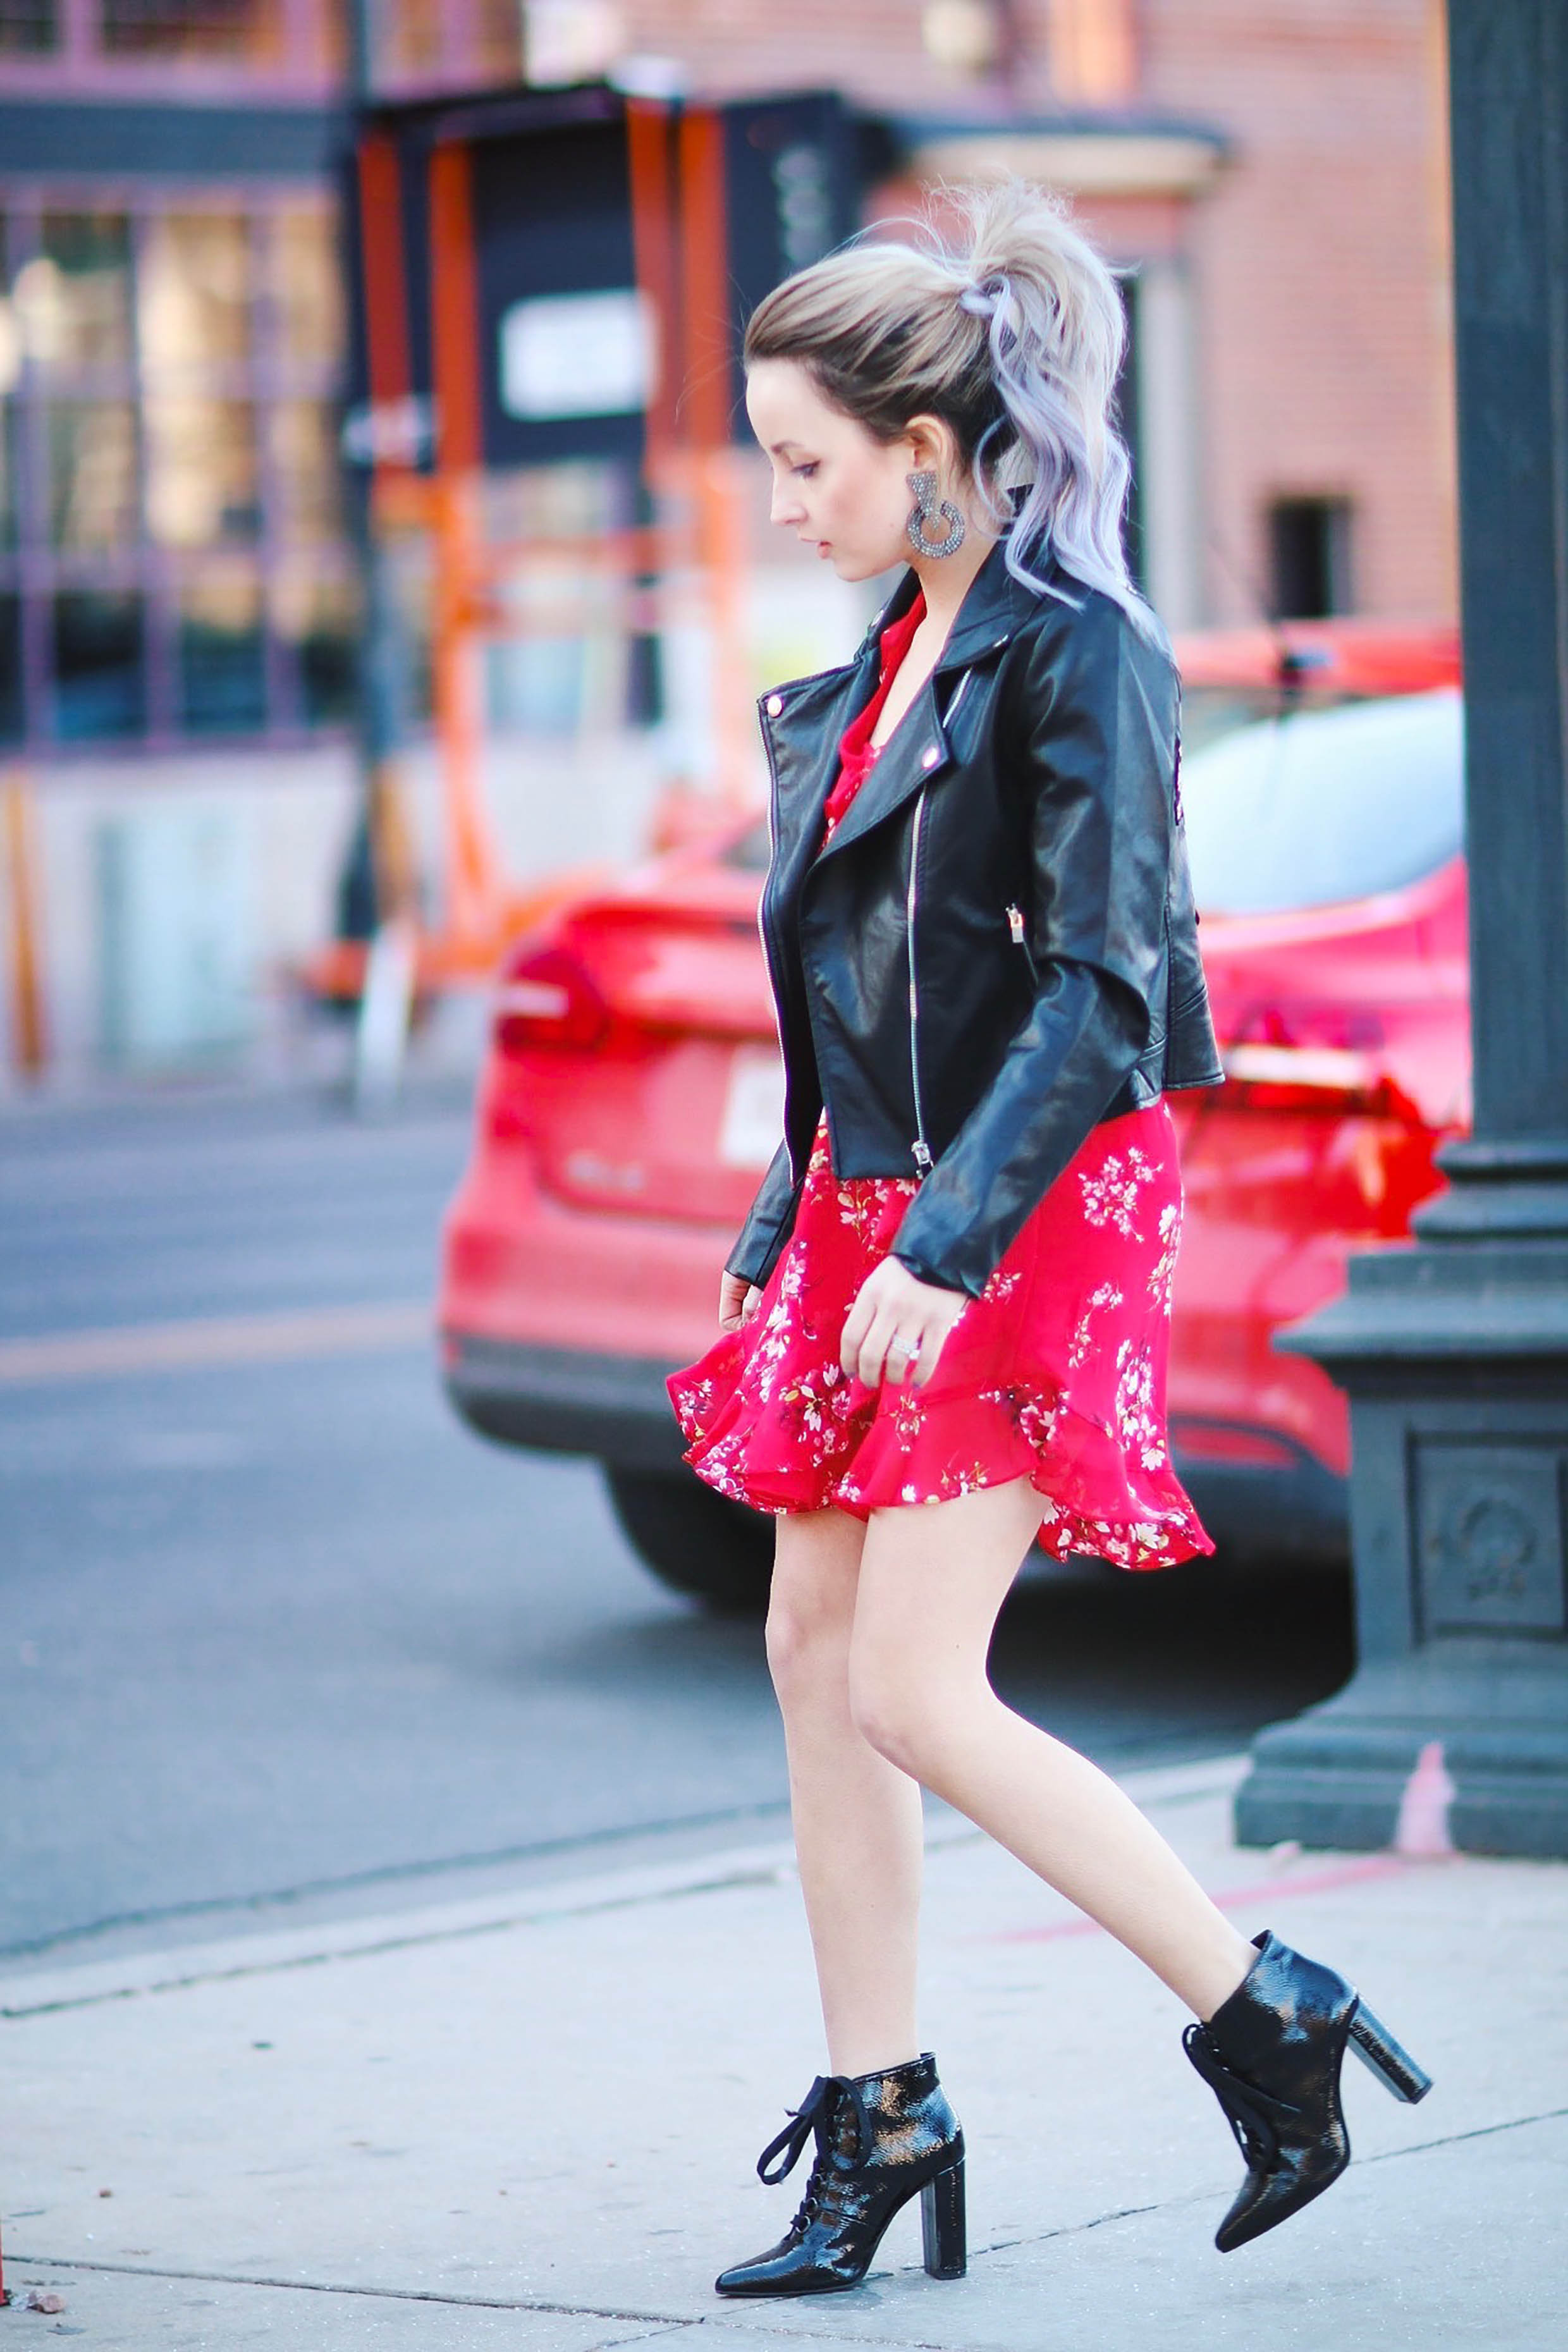 Alena Gidenko of modapcrits.com styles a red floral dress with a black faux leather floral jacket